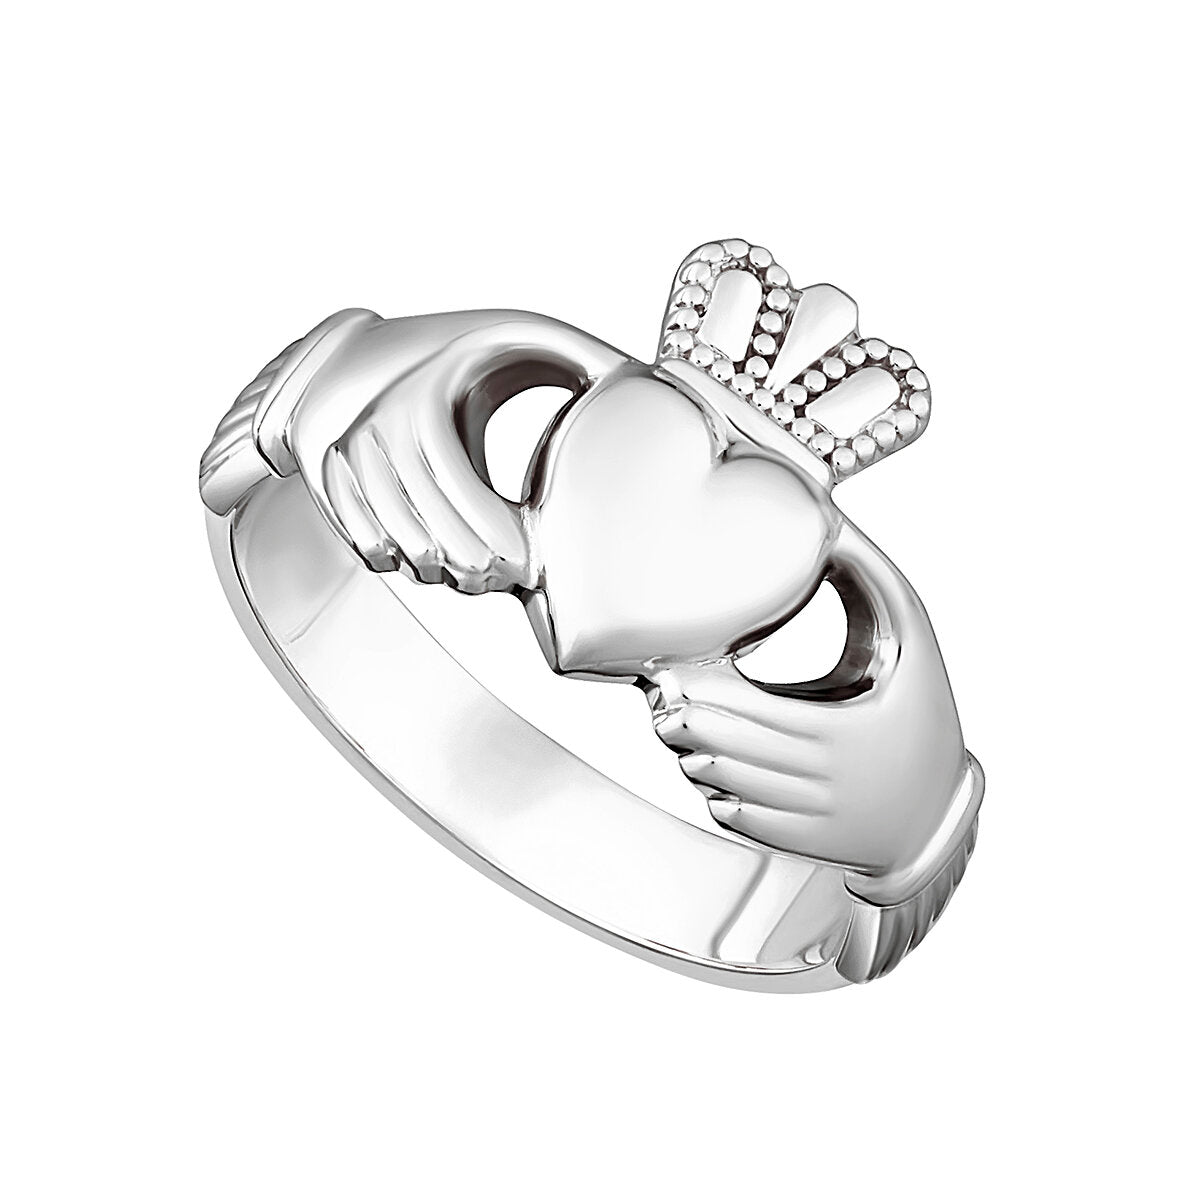 Gent's Silver Claddagh Ring